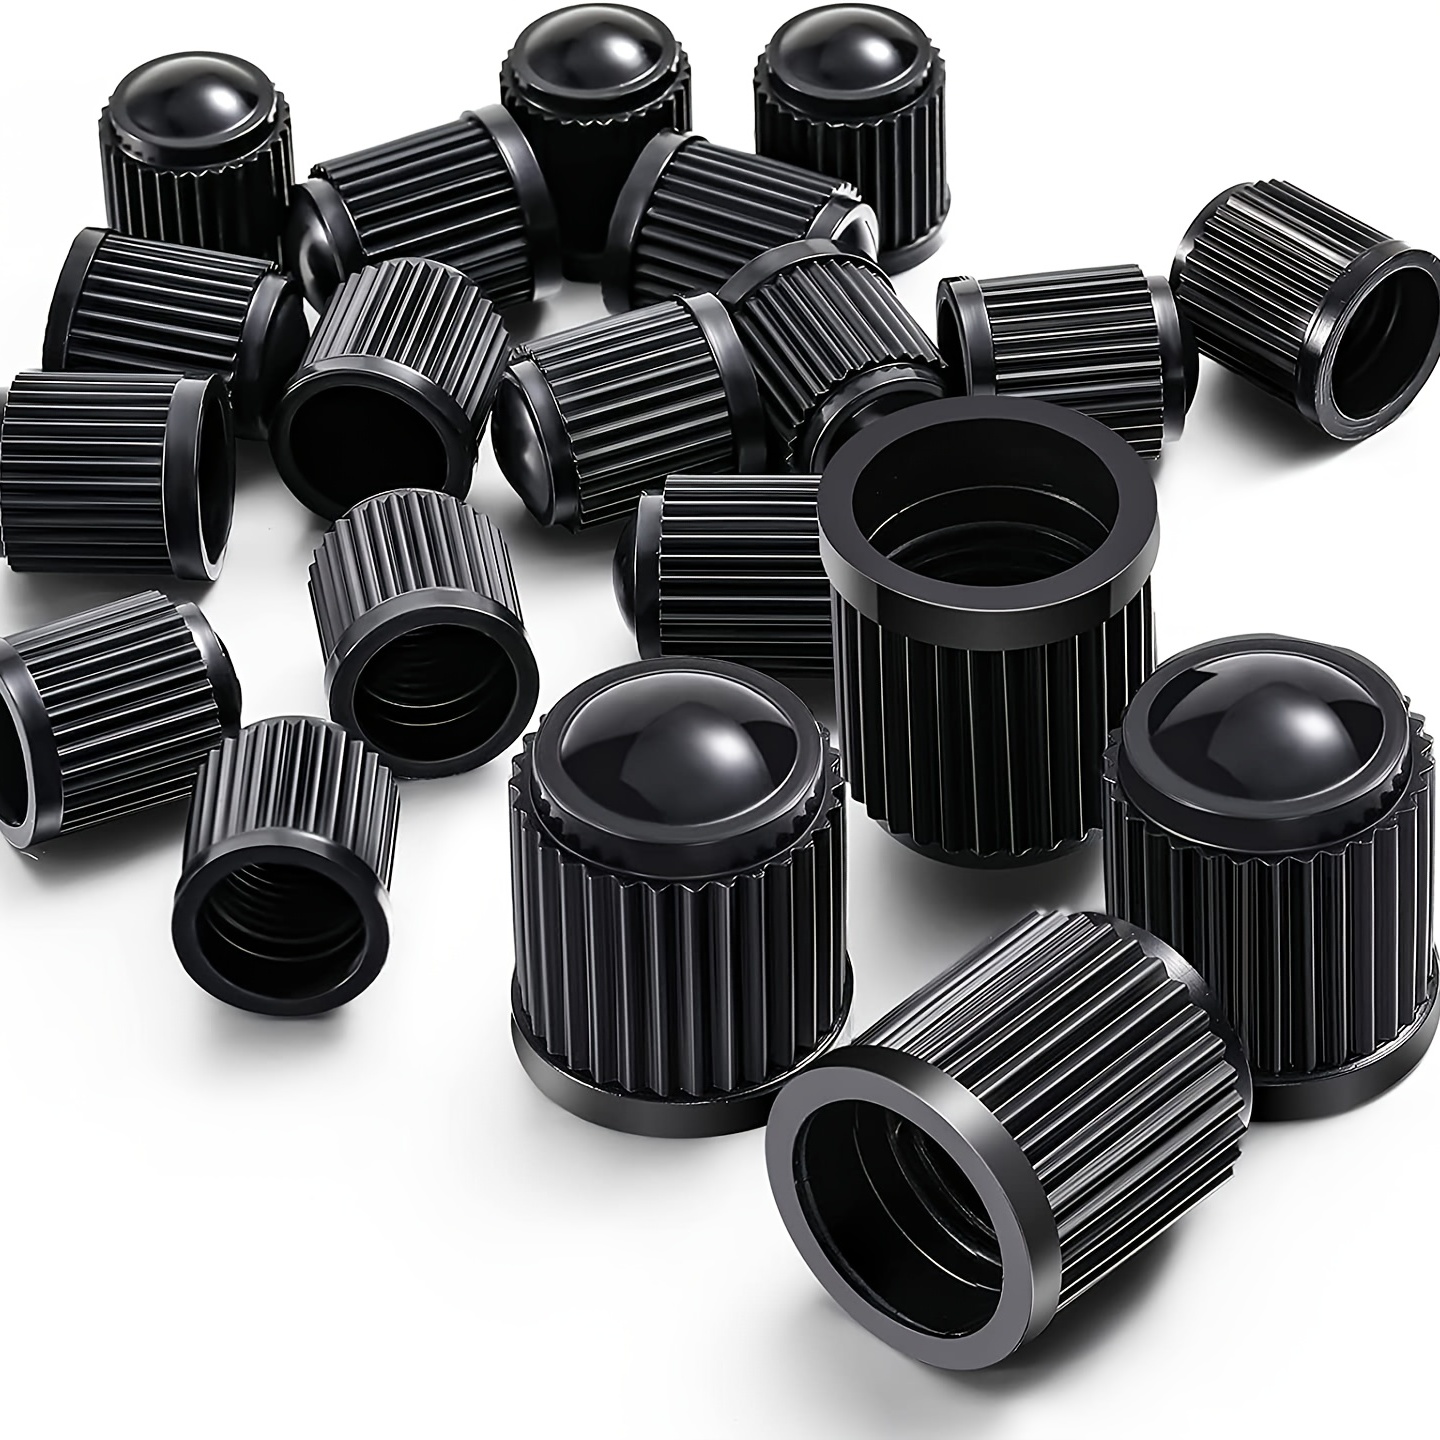 Tire Valve Caps Black Universal Stem Covers For Cars SUVs Bike And Bicycle Trucks Motorcycles